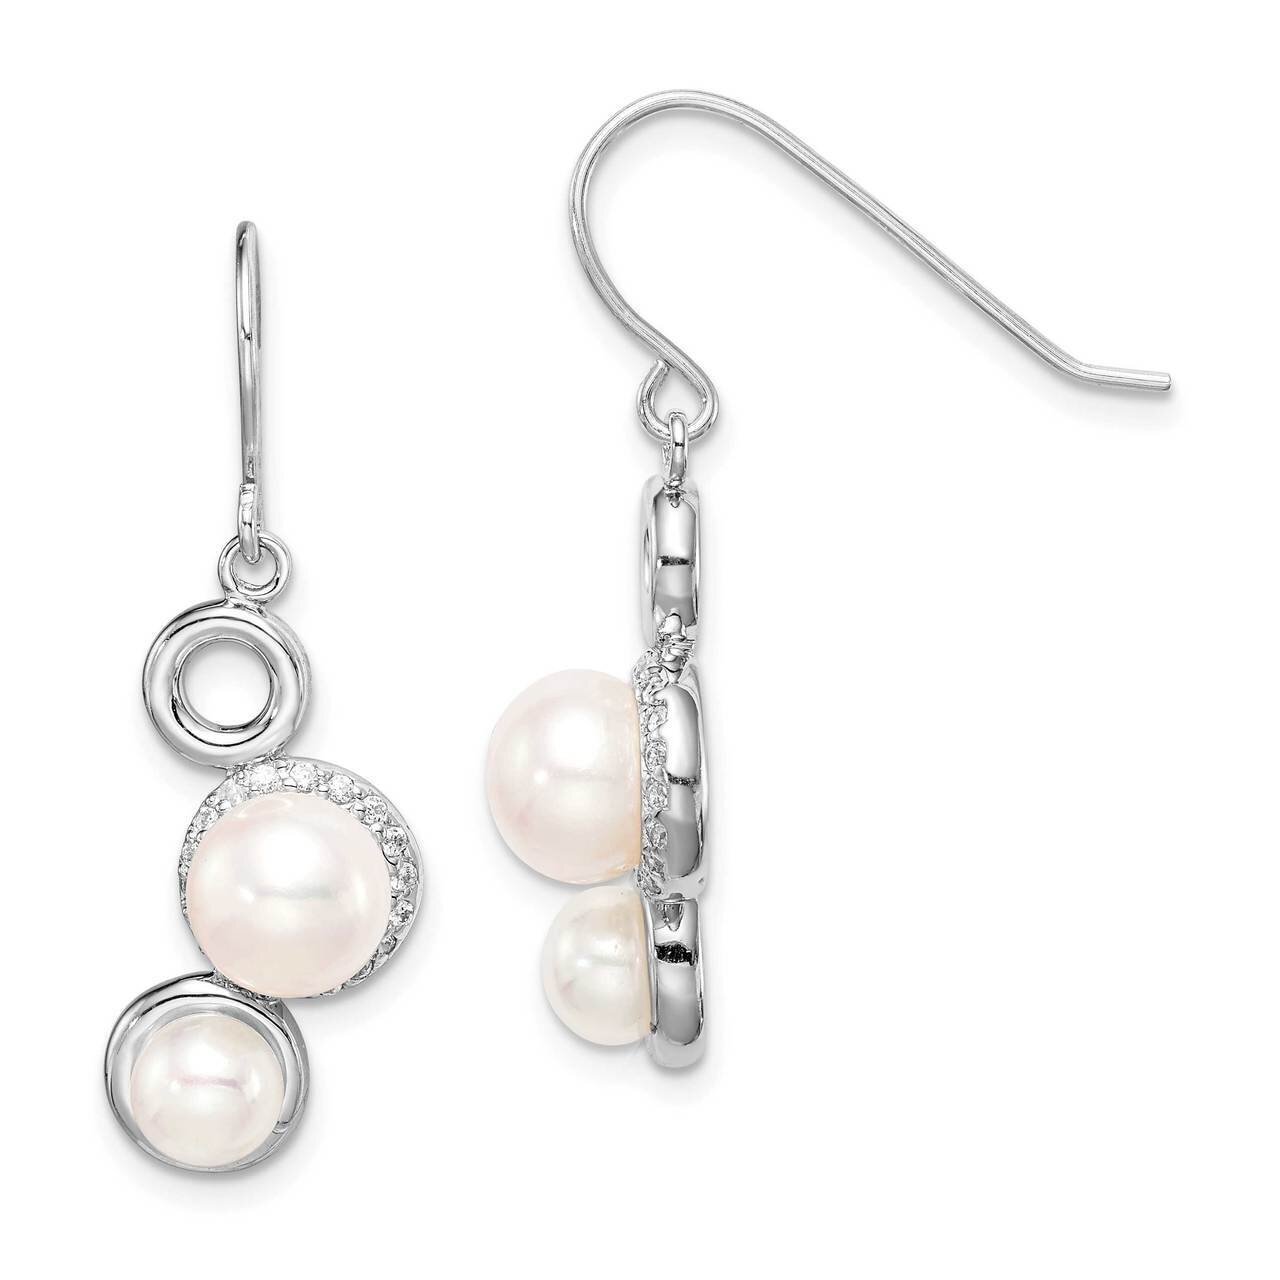 5-6 and 7-8mm White Button Freshwater Cultured Pearl CZ Diamond Earrings Sterling Silver Rhodium Plated QE15415